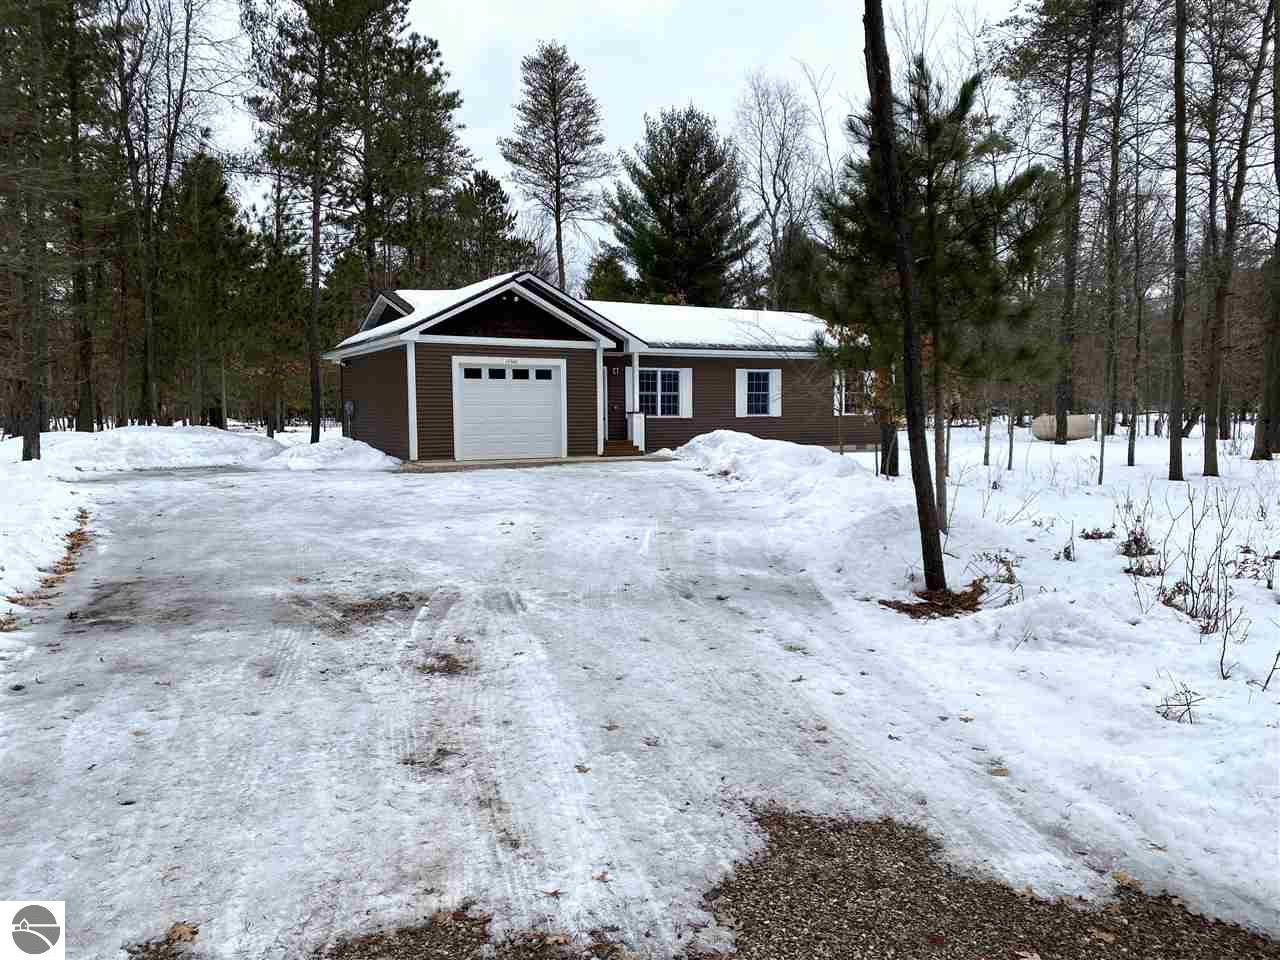 10360 W Rosted Road, Lake City, MI 49651 photo 43 of 52